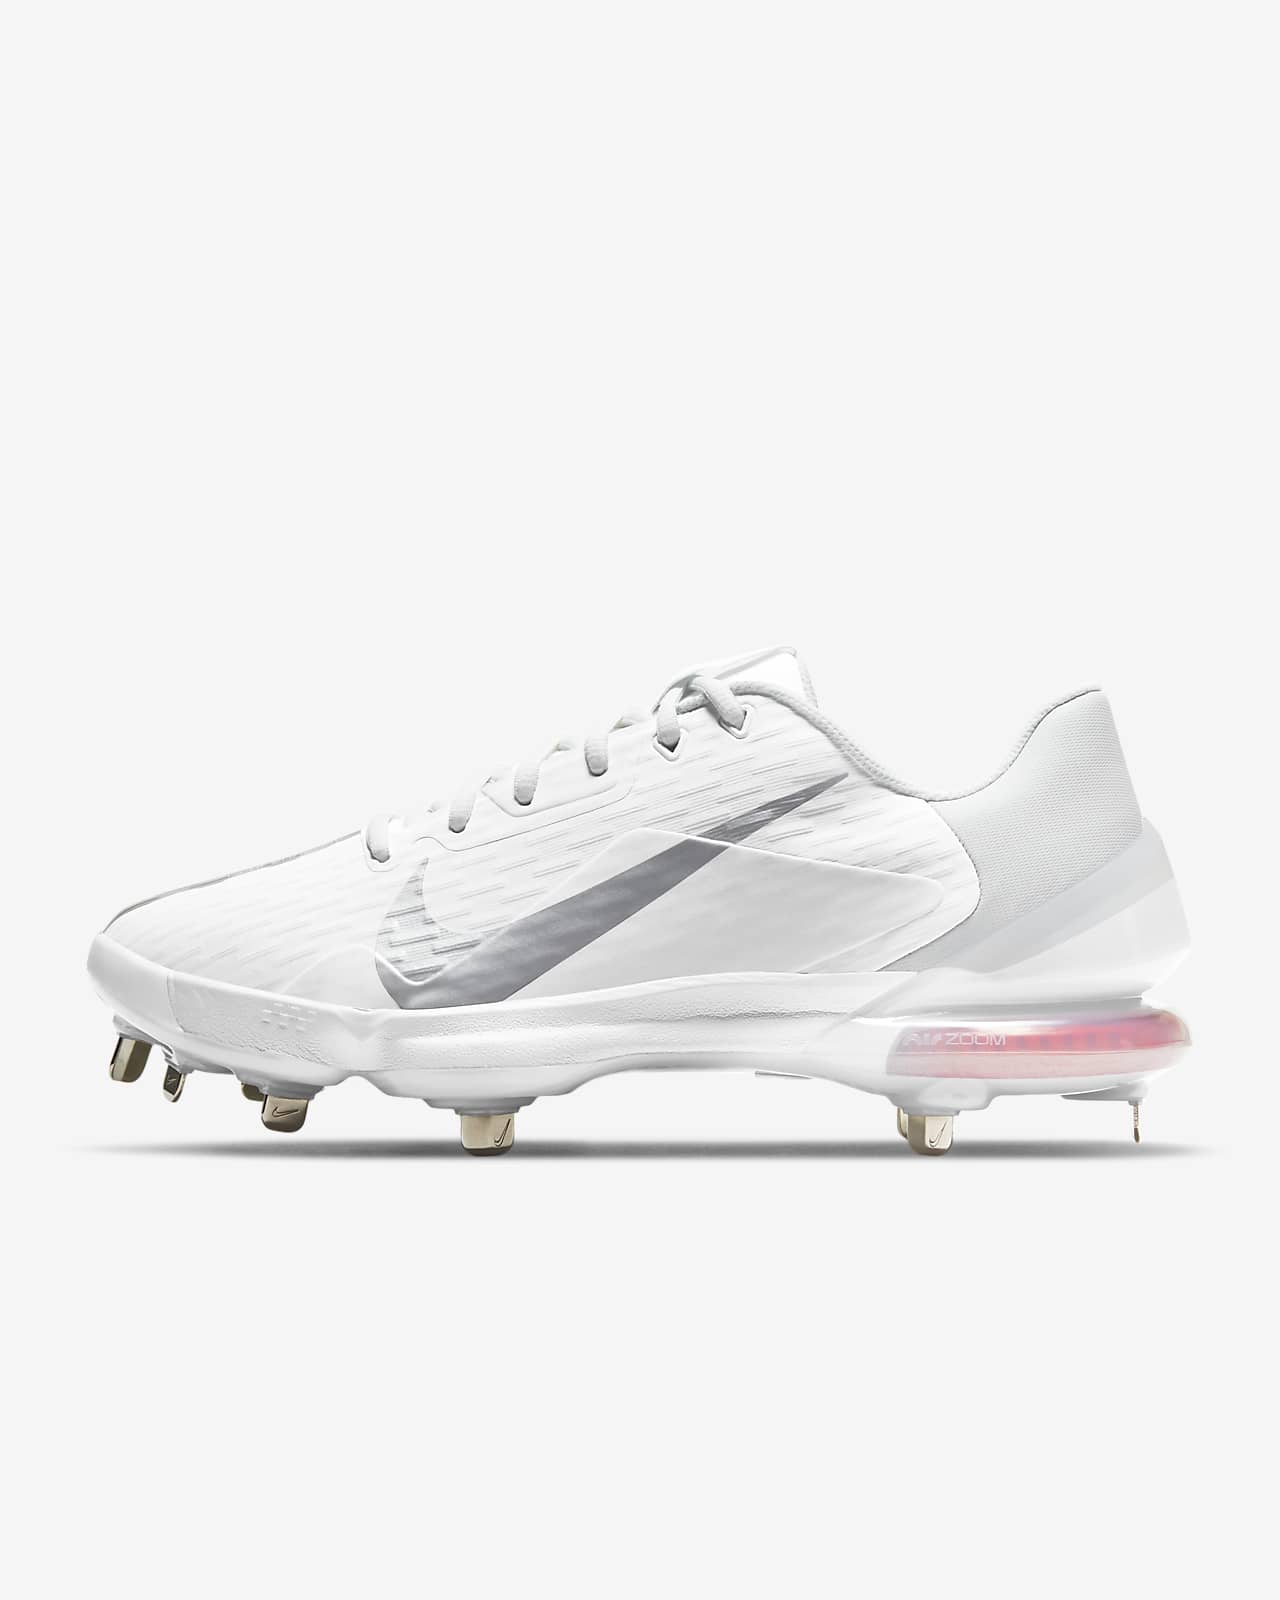 nike force trout cleats Off 60% - www.gmcanantnag.net قمع بخاخ الربو